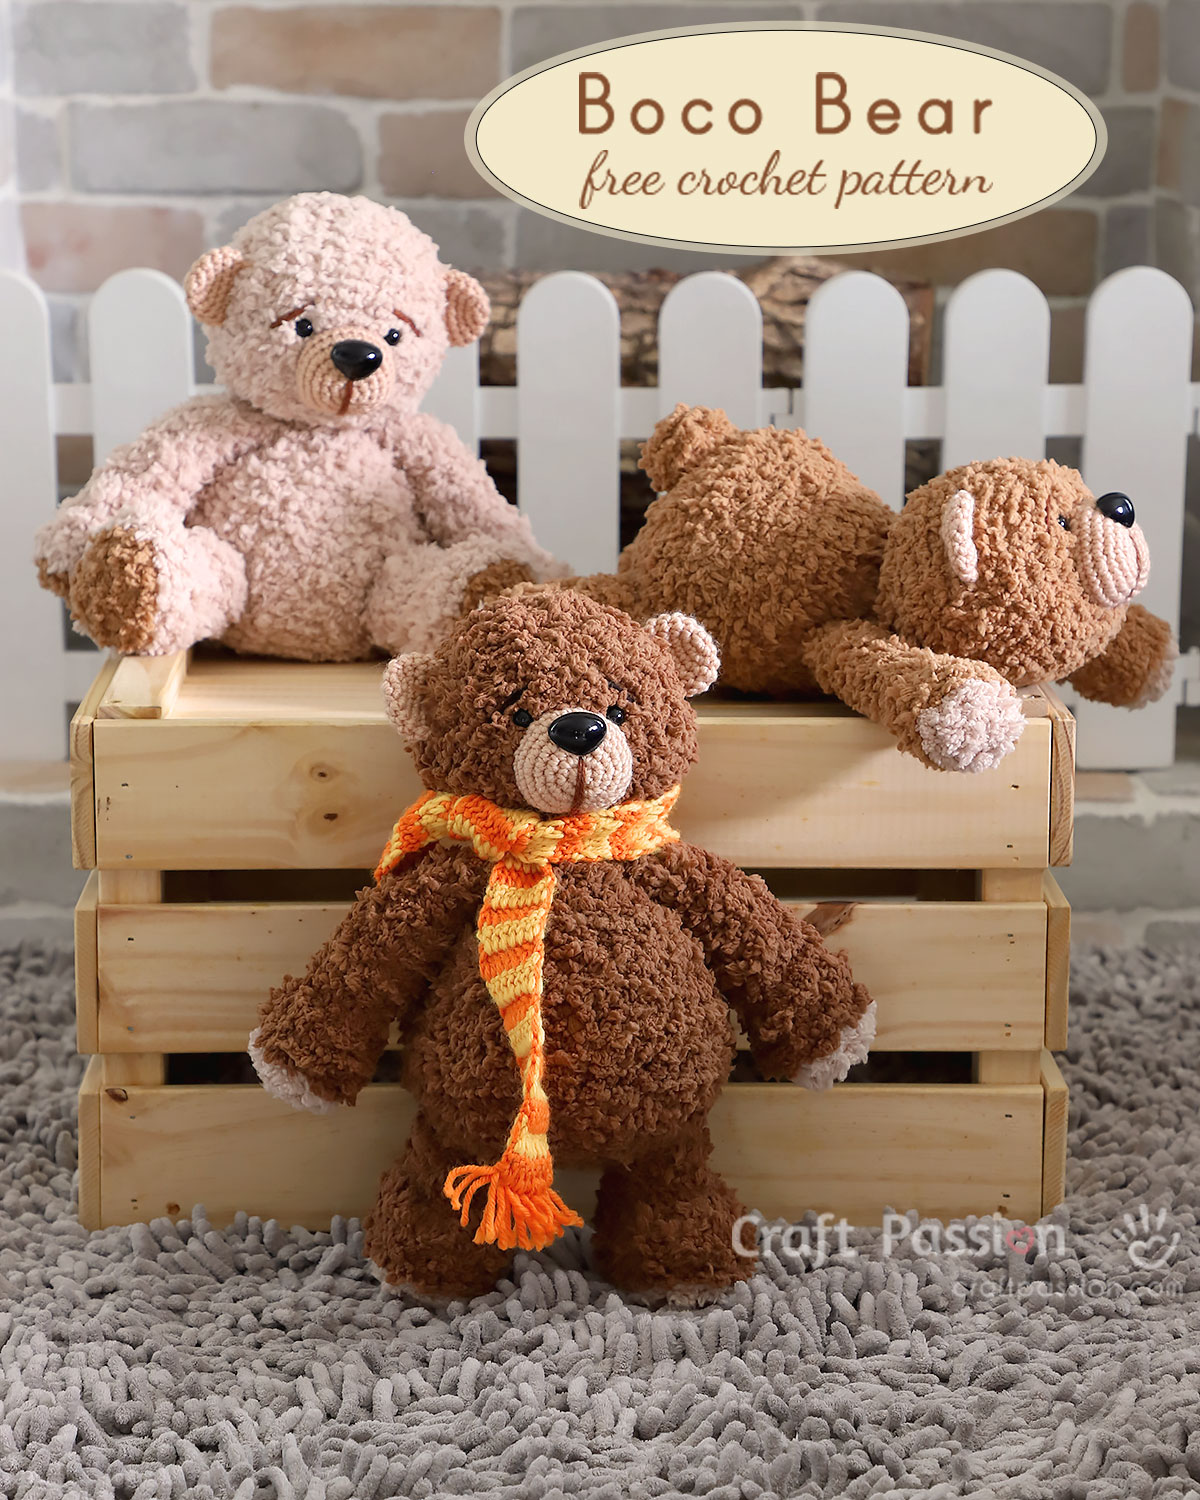 Boco Crochet Bear Amigurumi is a perfect cuddly stuffed animal toy in a huggable size of 10" to 12". Free crochet pattern for making 3 different poses on the bear. 